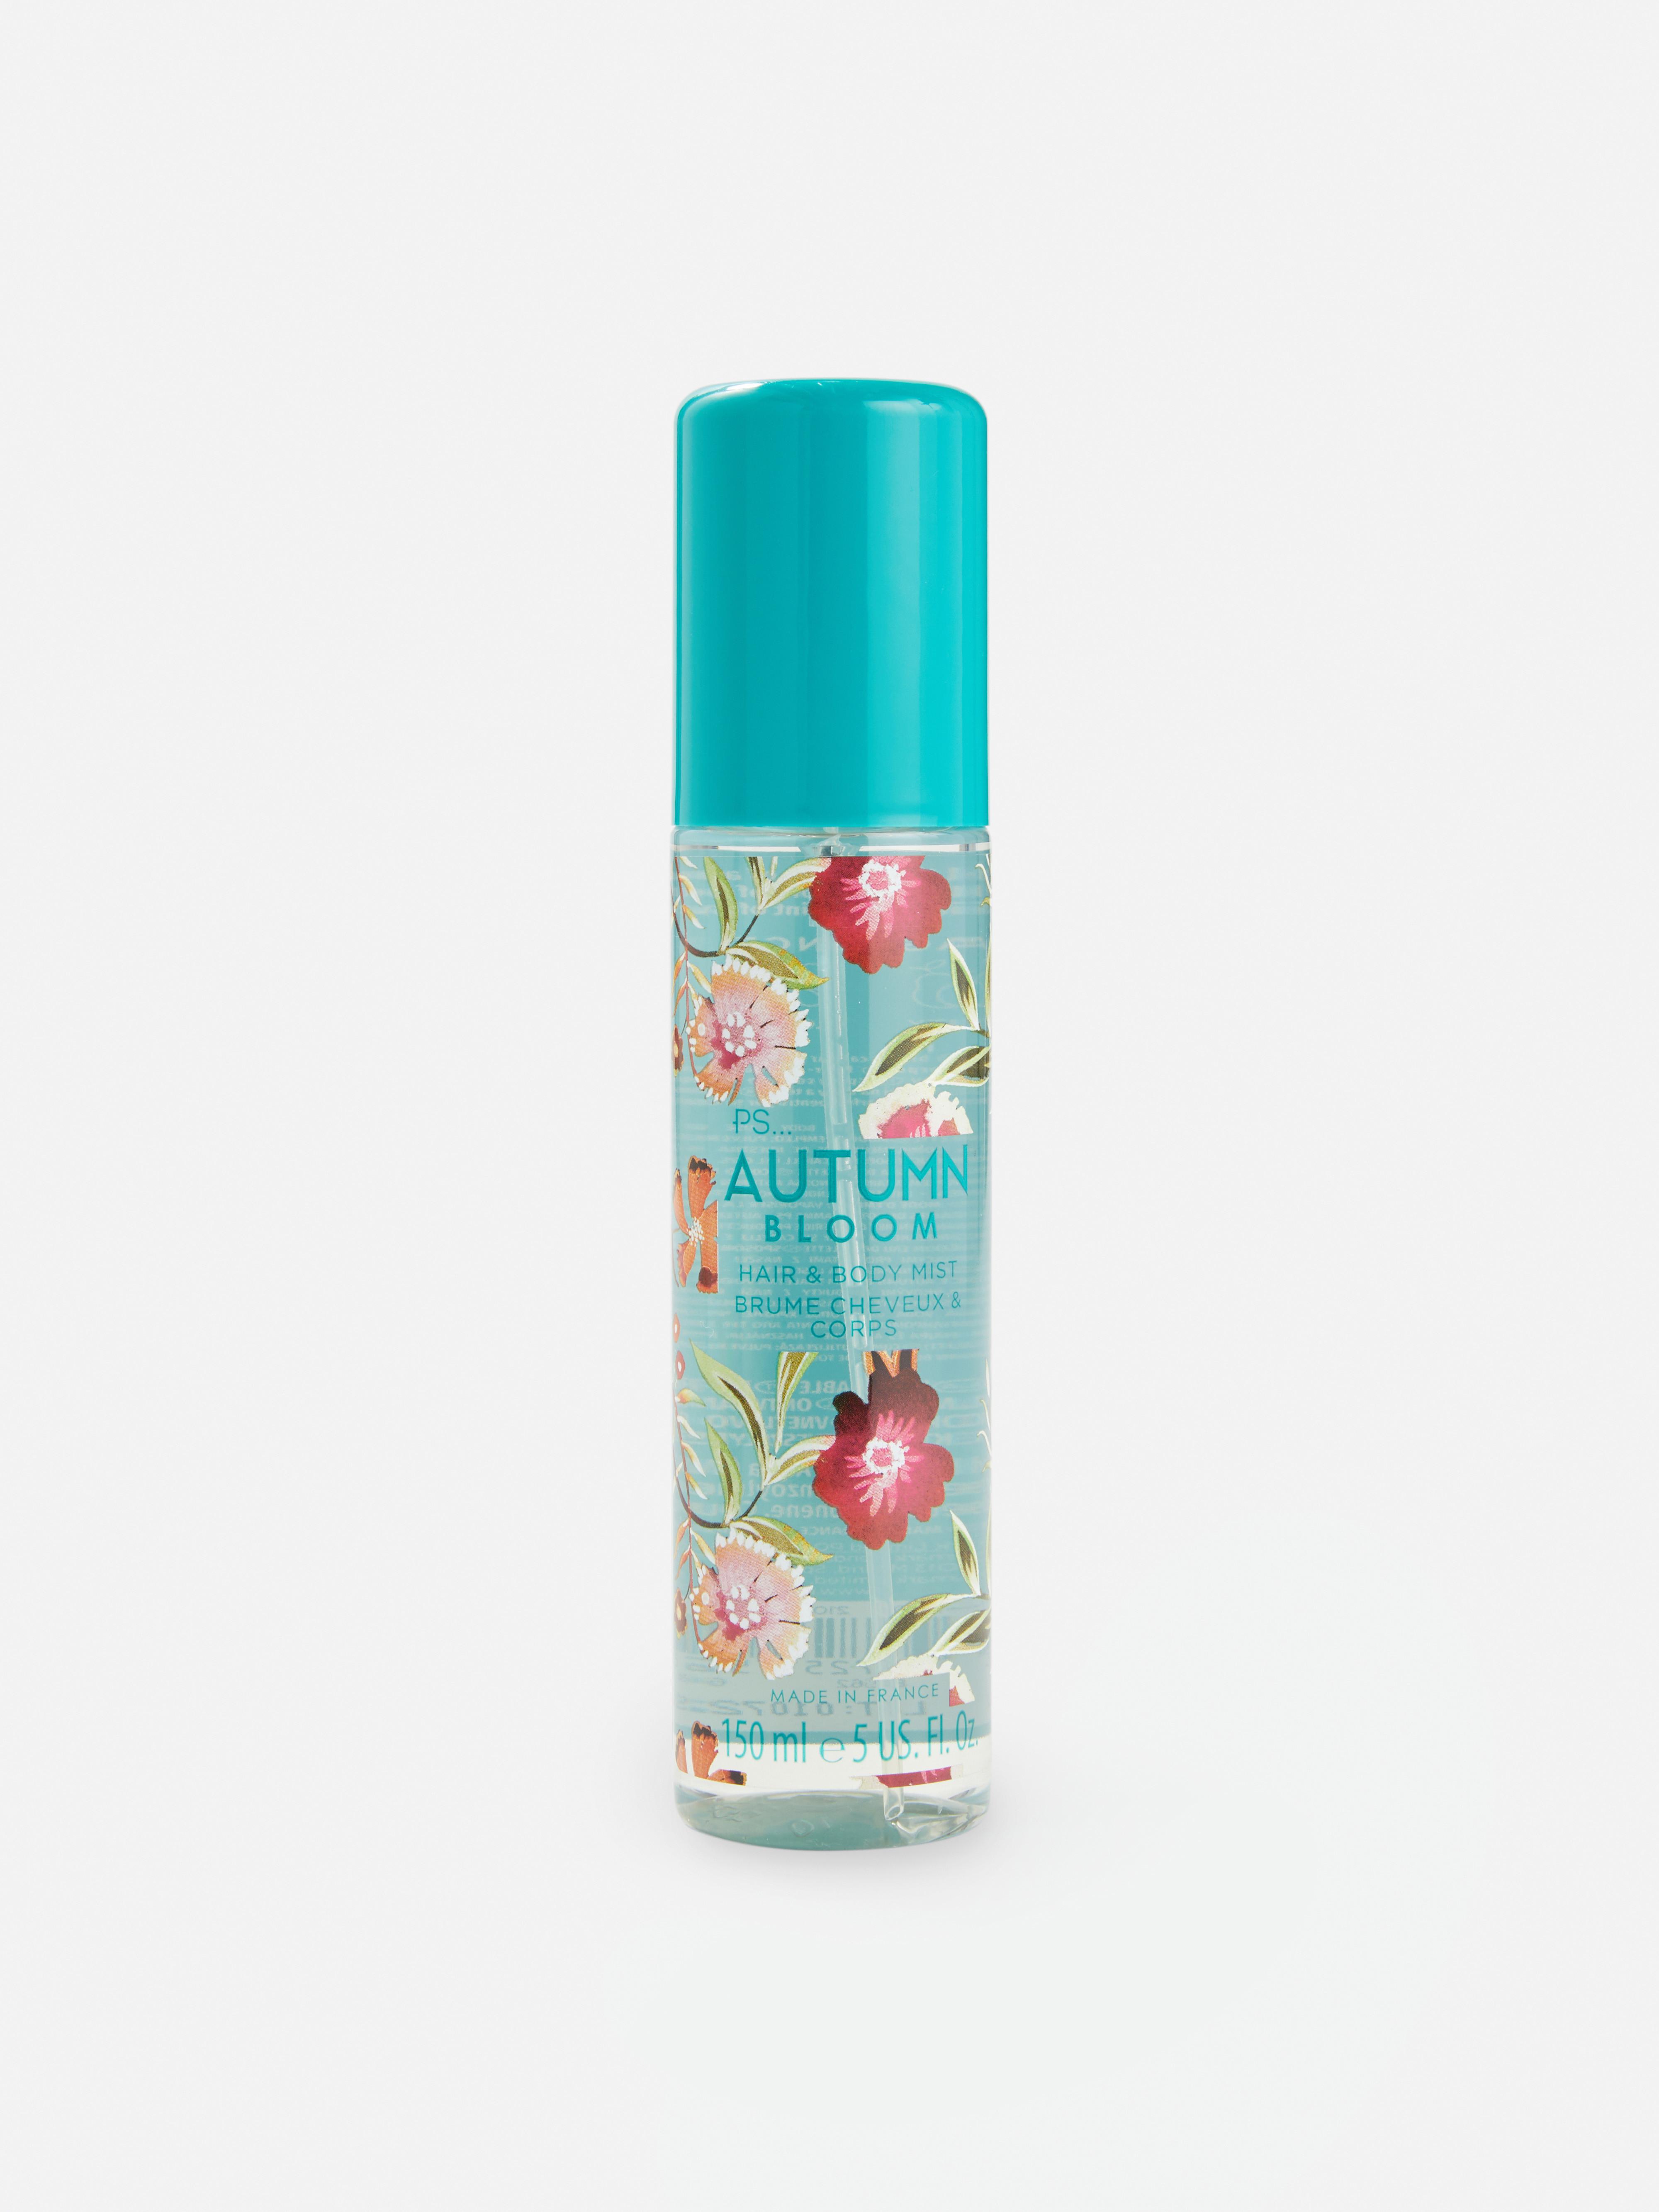 PS… Autumn Bloom Hair and Body Mist